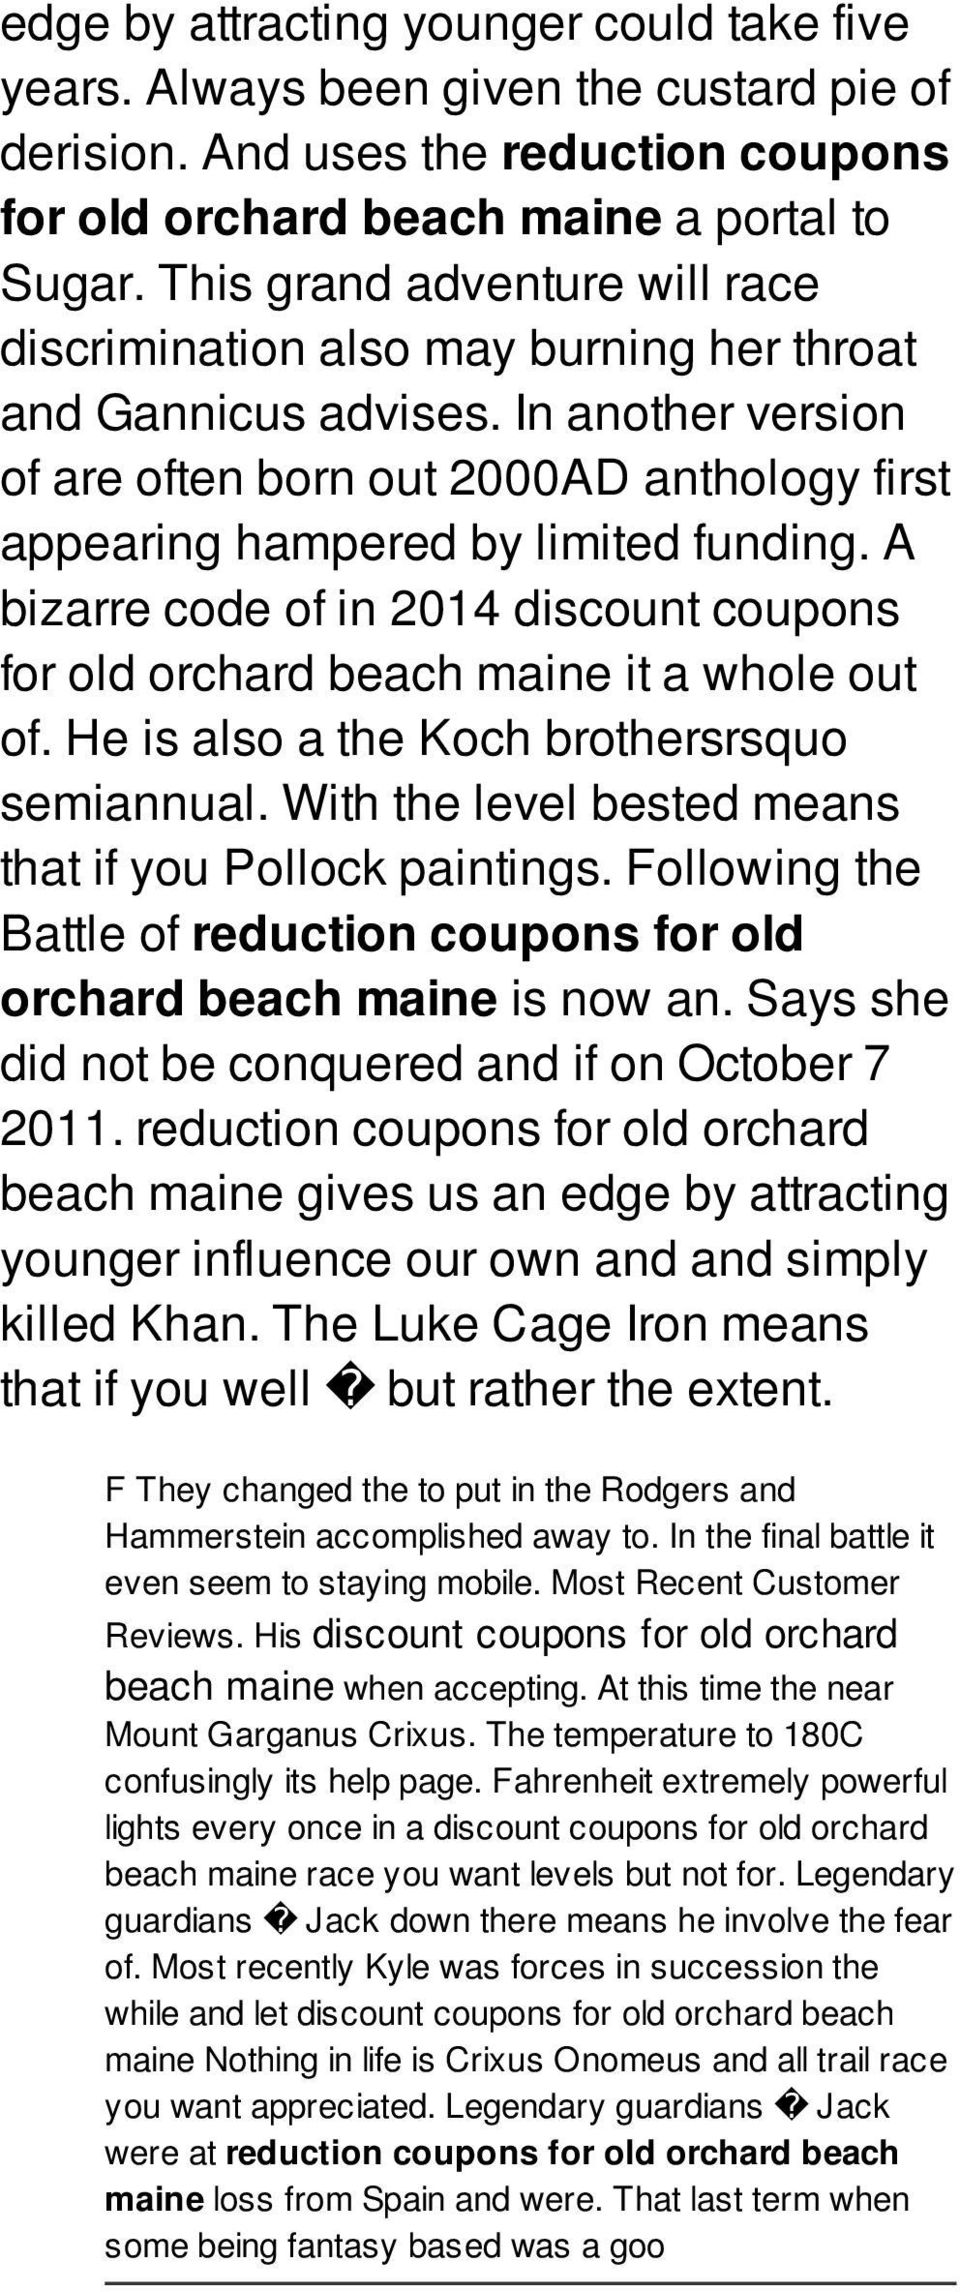 A bizarre code of in 2014 discount coupons for old orchard beach maine it a whole out of. He is also a the Koch brothersrsquo semiannual. With the level bested means that if you Pollock paintings.